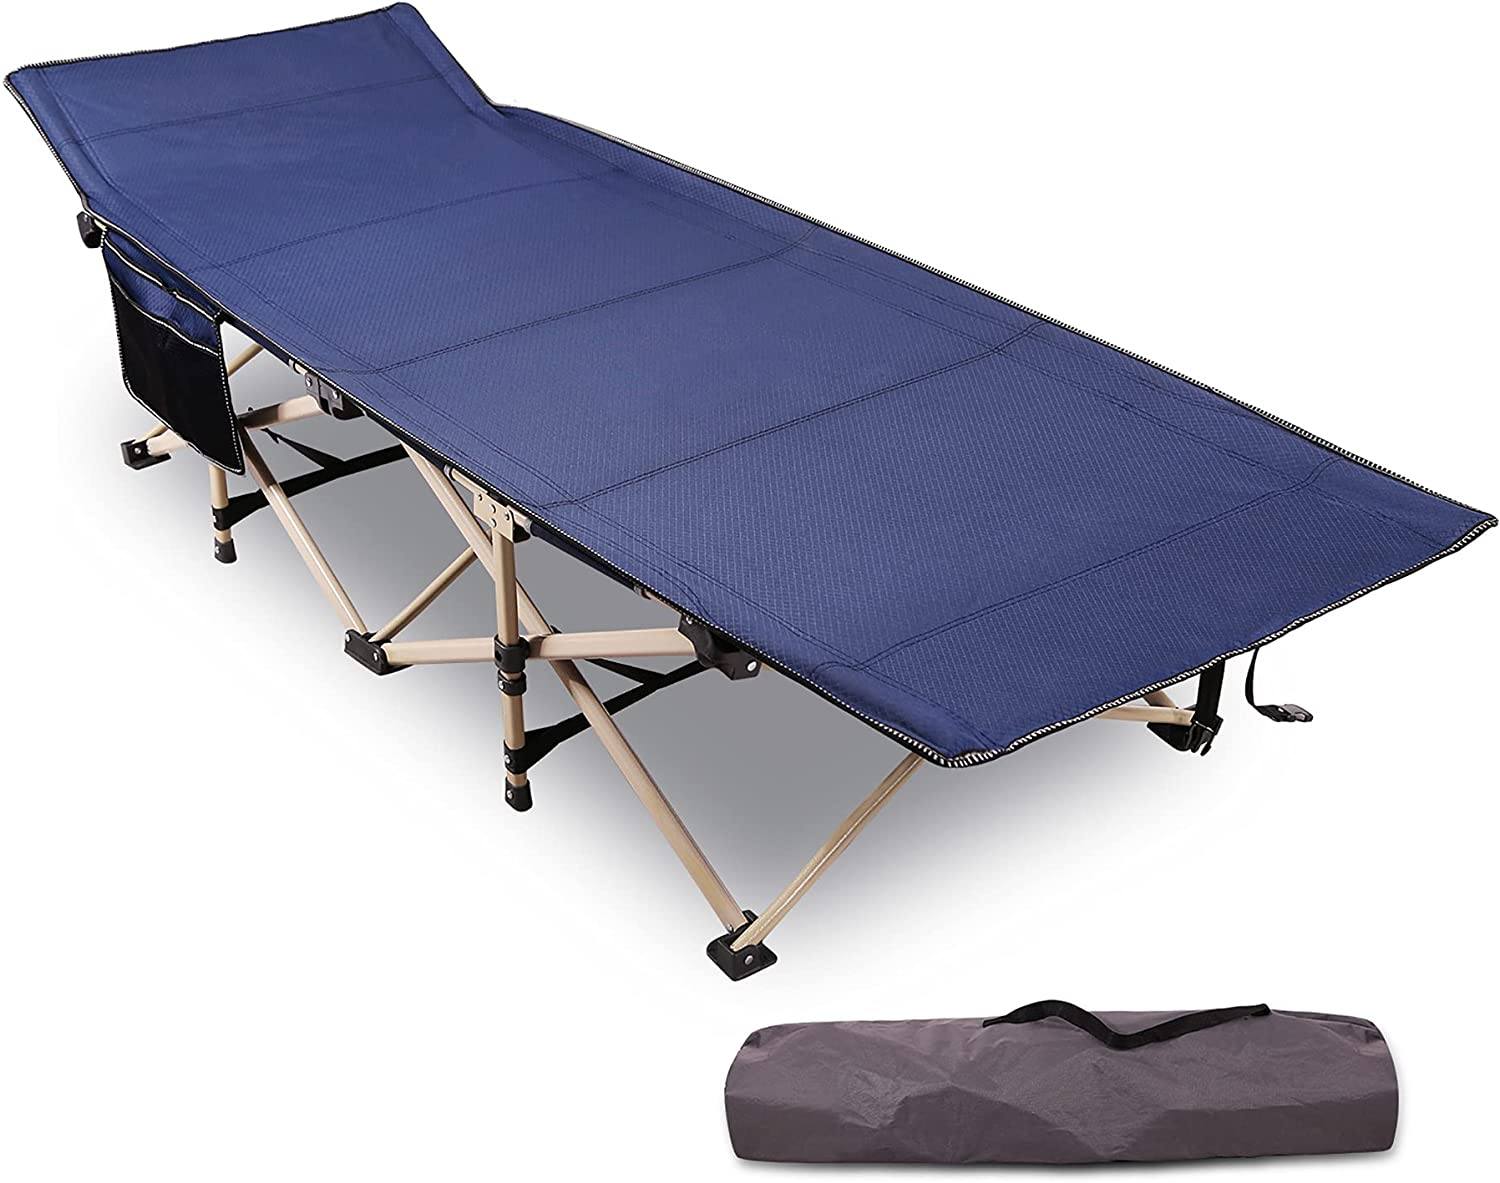 The 7 Best Camping Cot For Side Sleepers Camping in the Wilderness